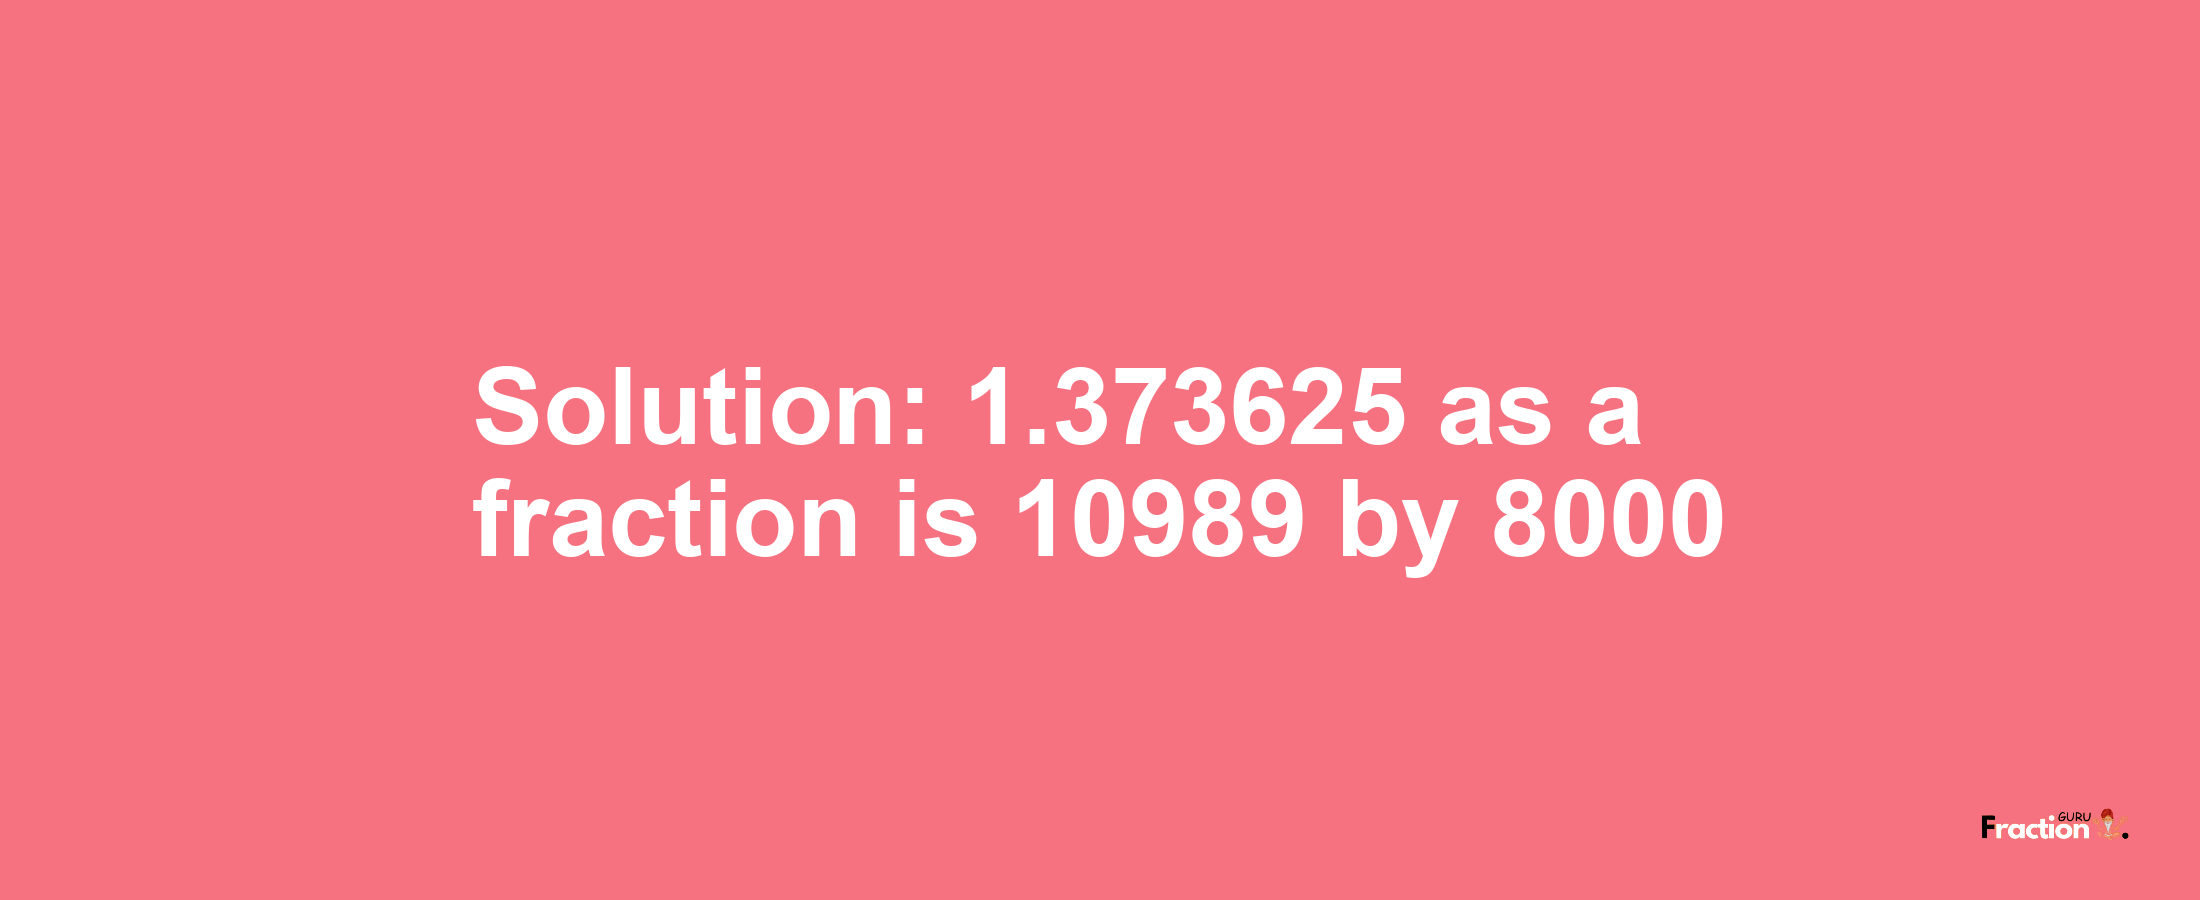 Solution:1.373625 as a fraction is 10989/8000